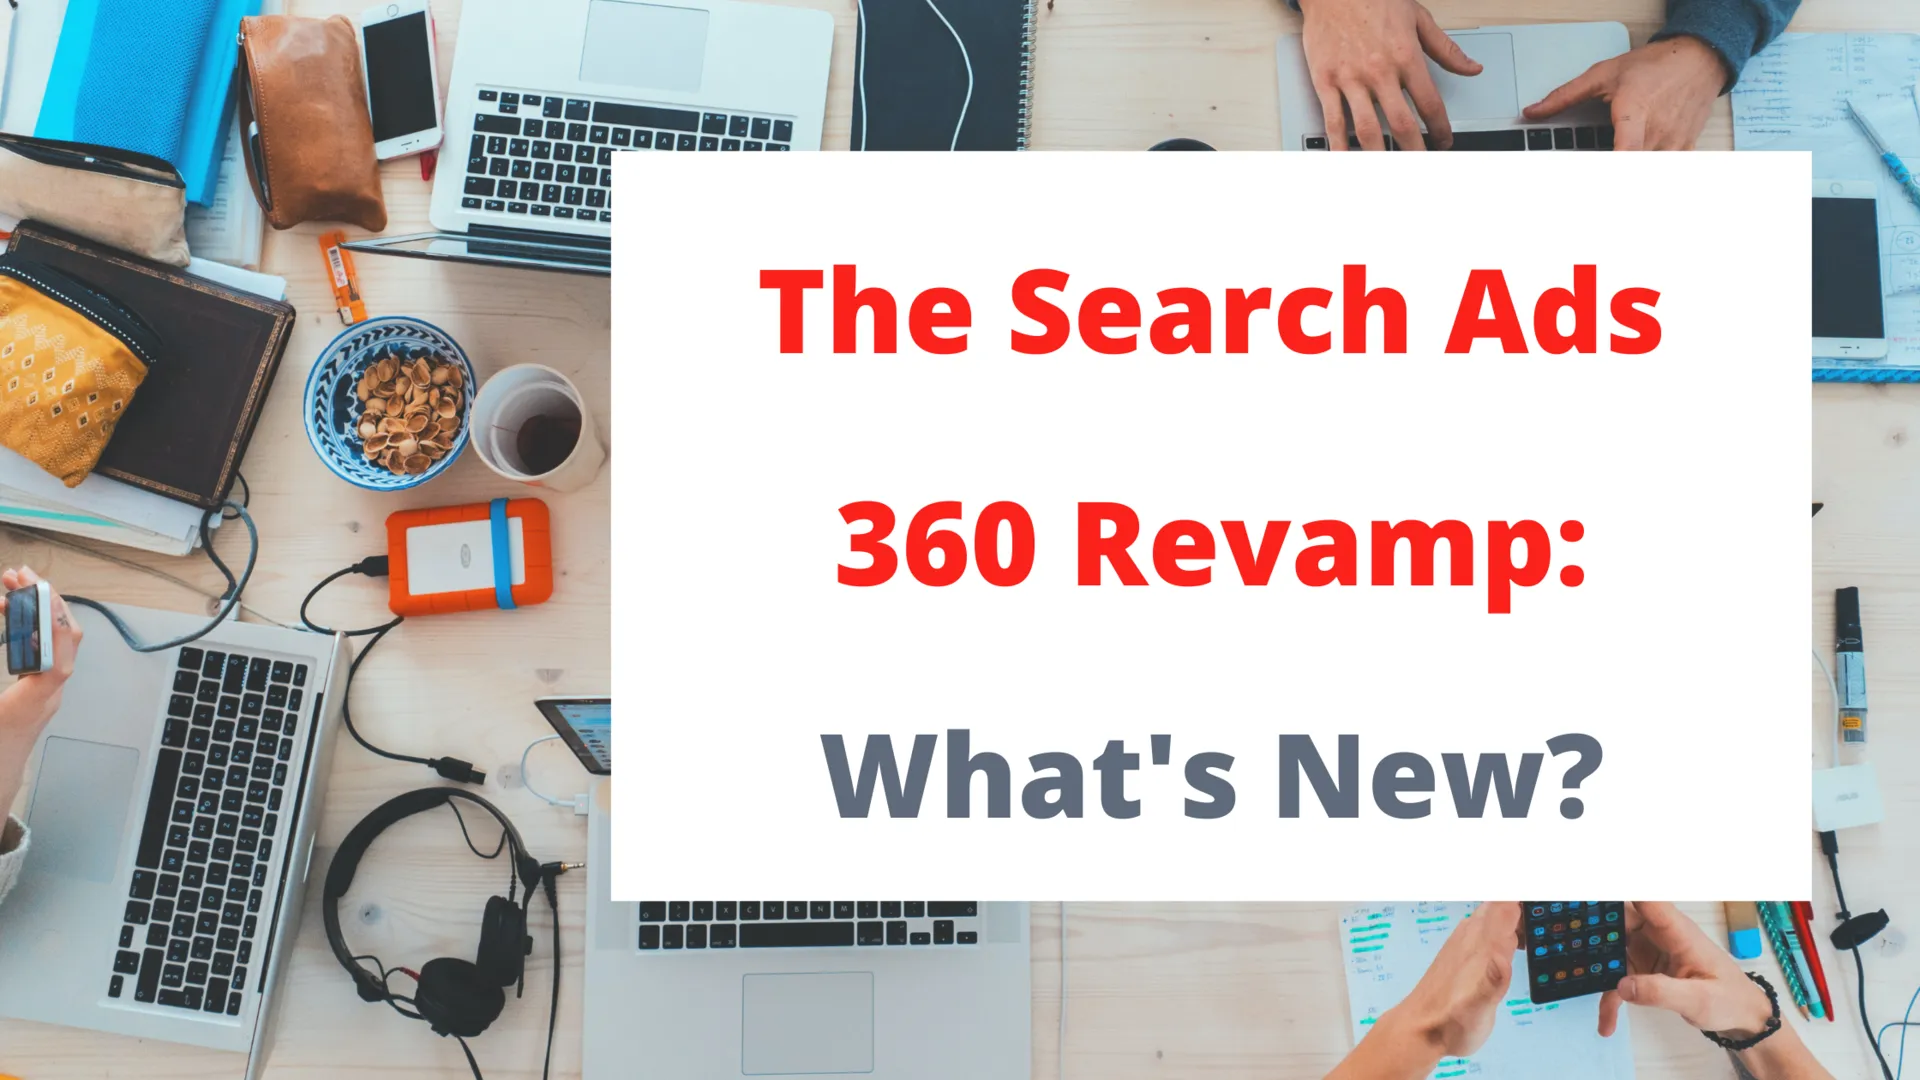 The Search Ads 360 Revamp: What's New?